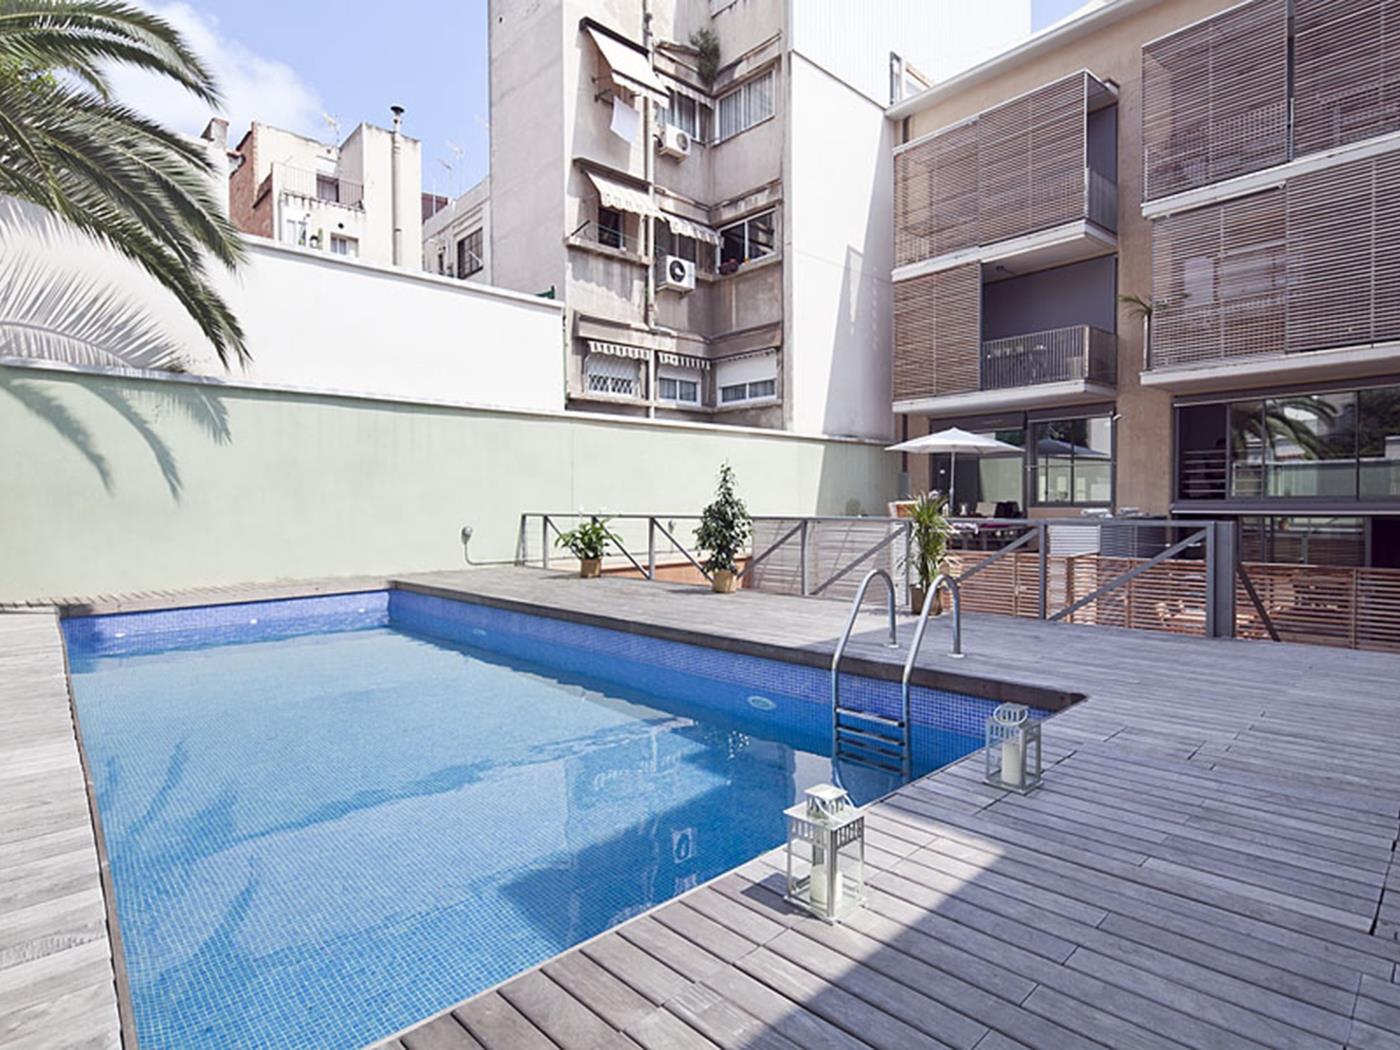 Private Terrace and Swimming Pool Apartment - My Space Barcelona Aпартаменты